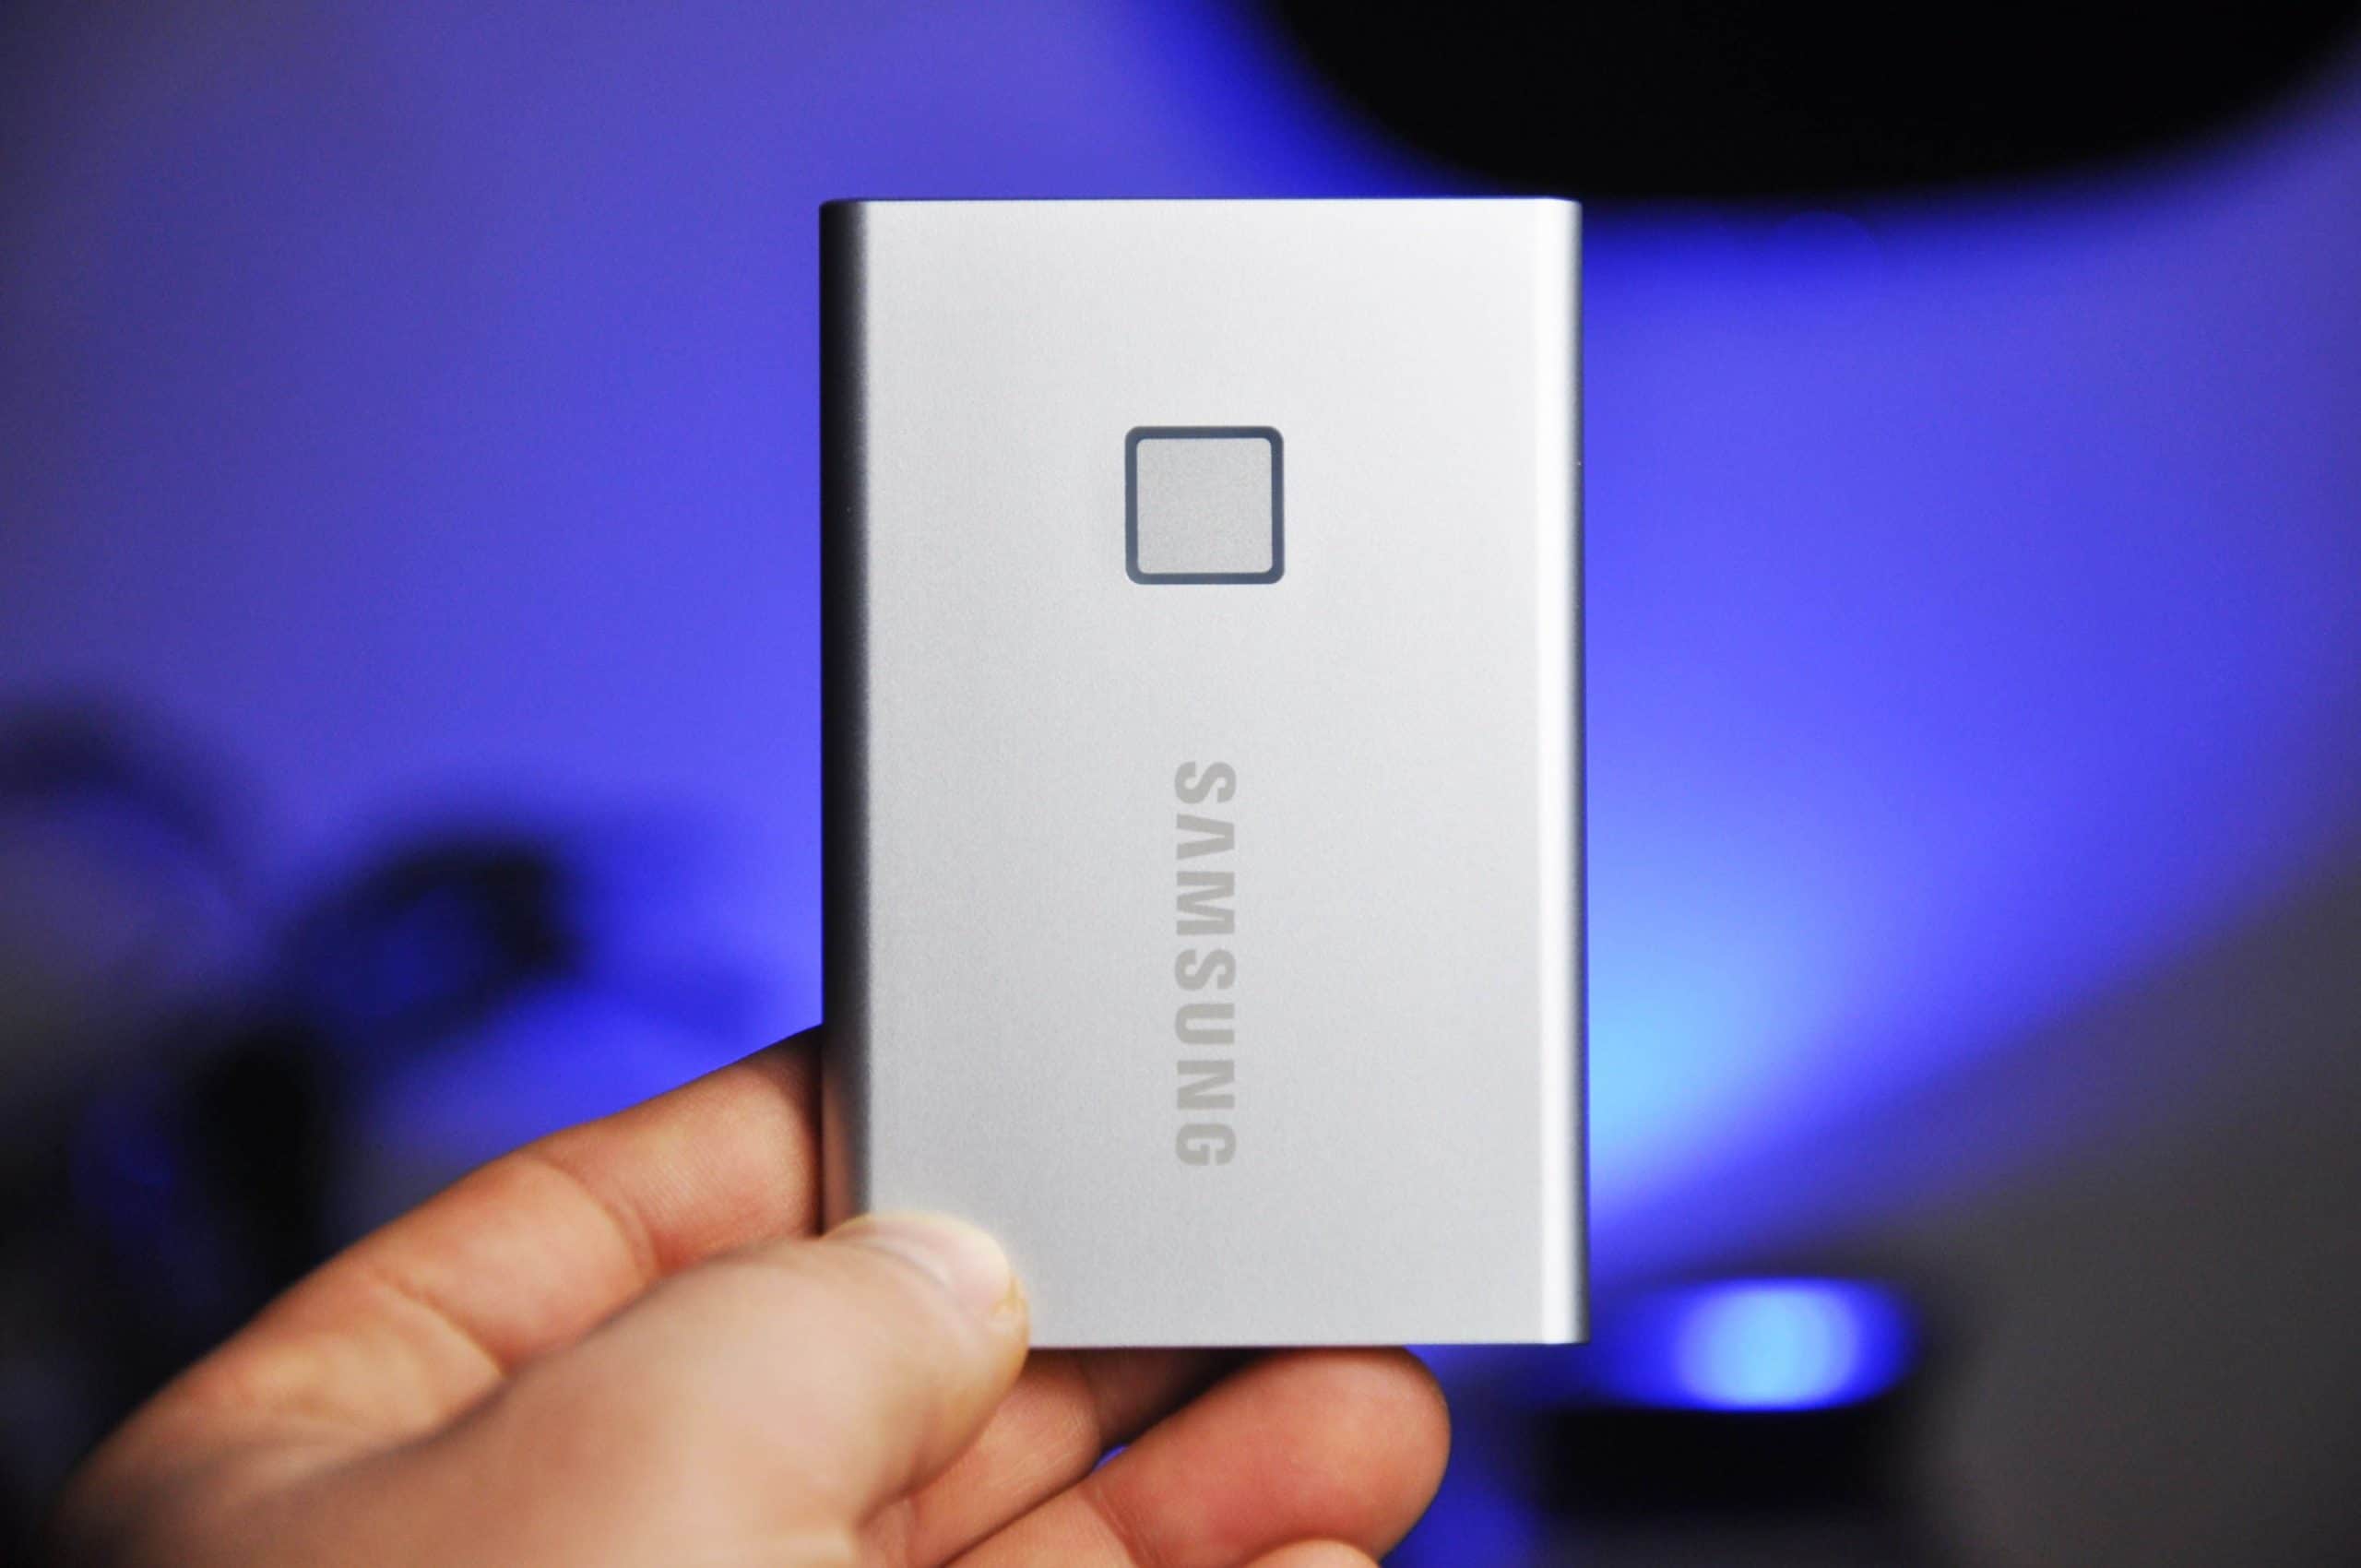 a fast and secure portable SSD